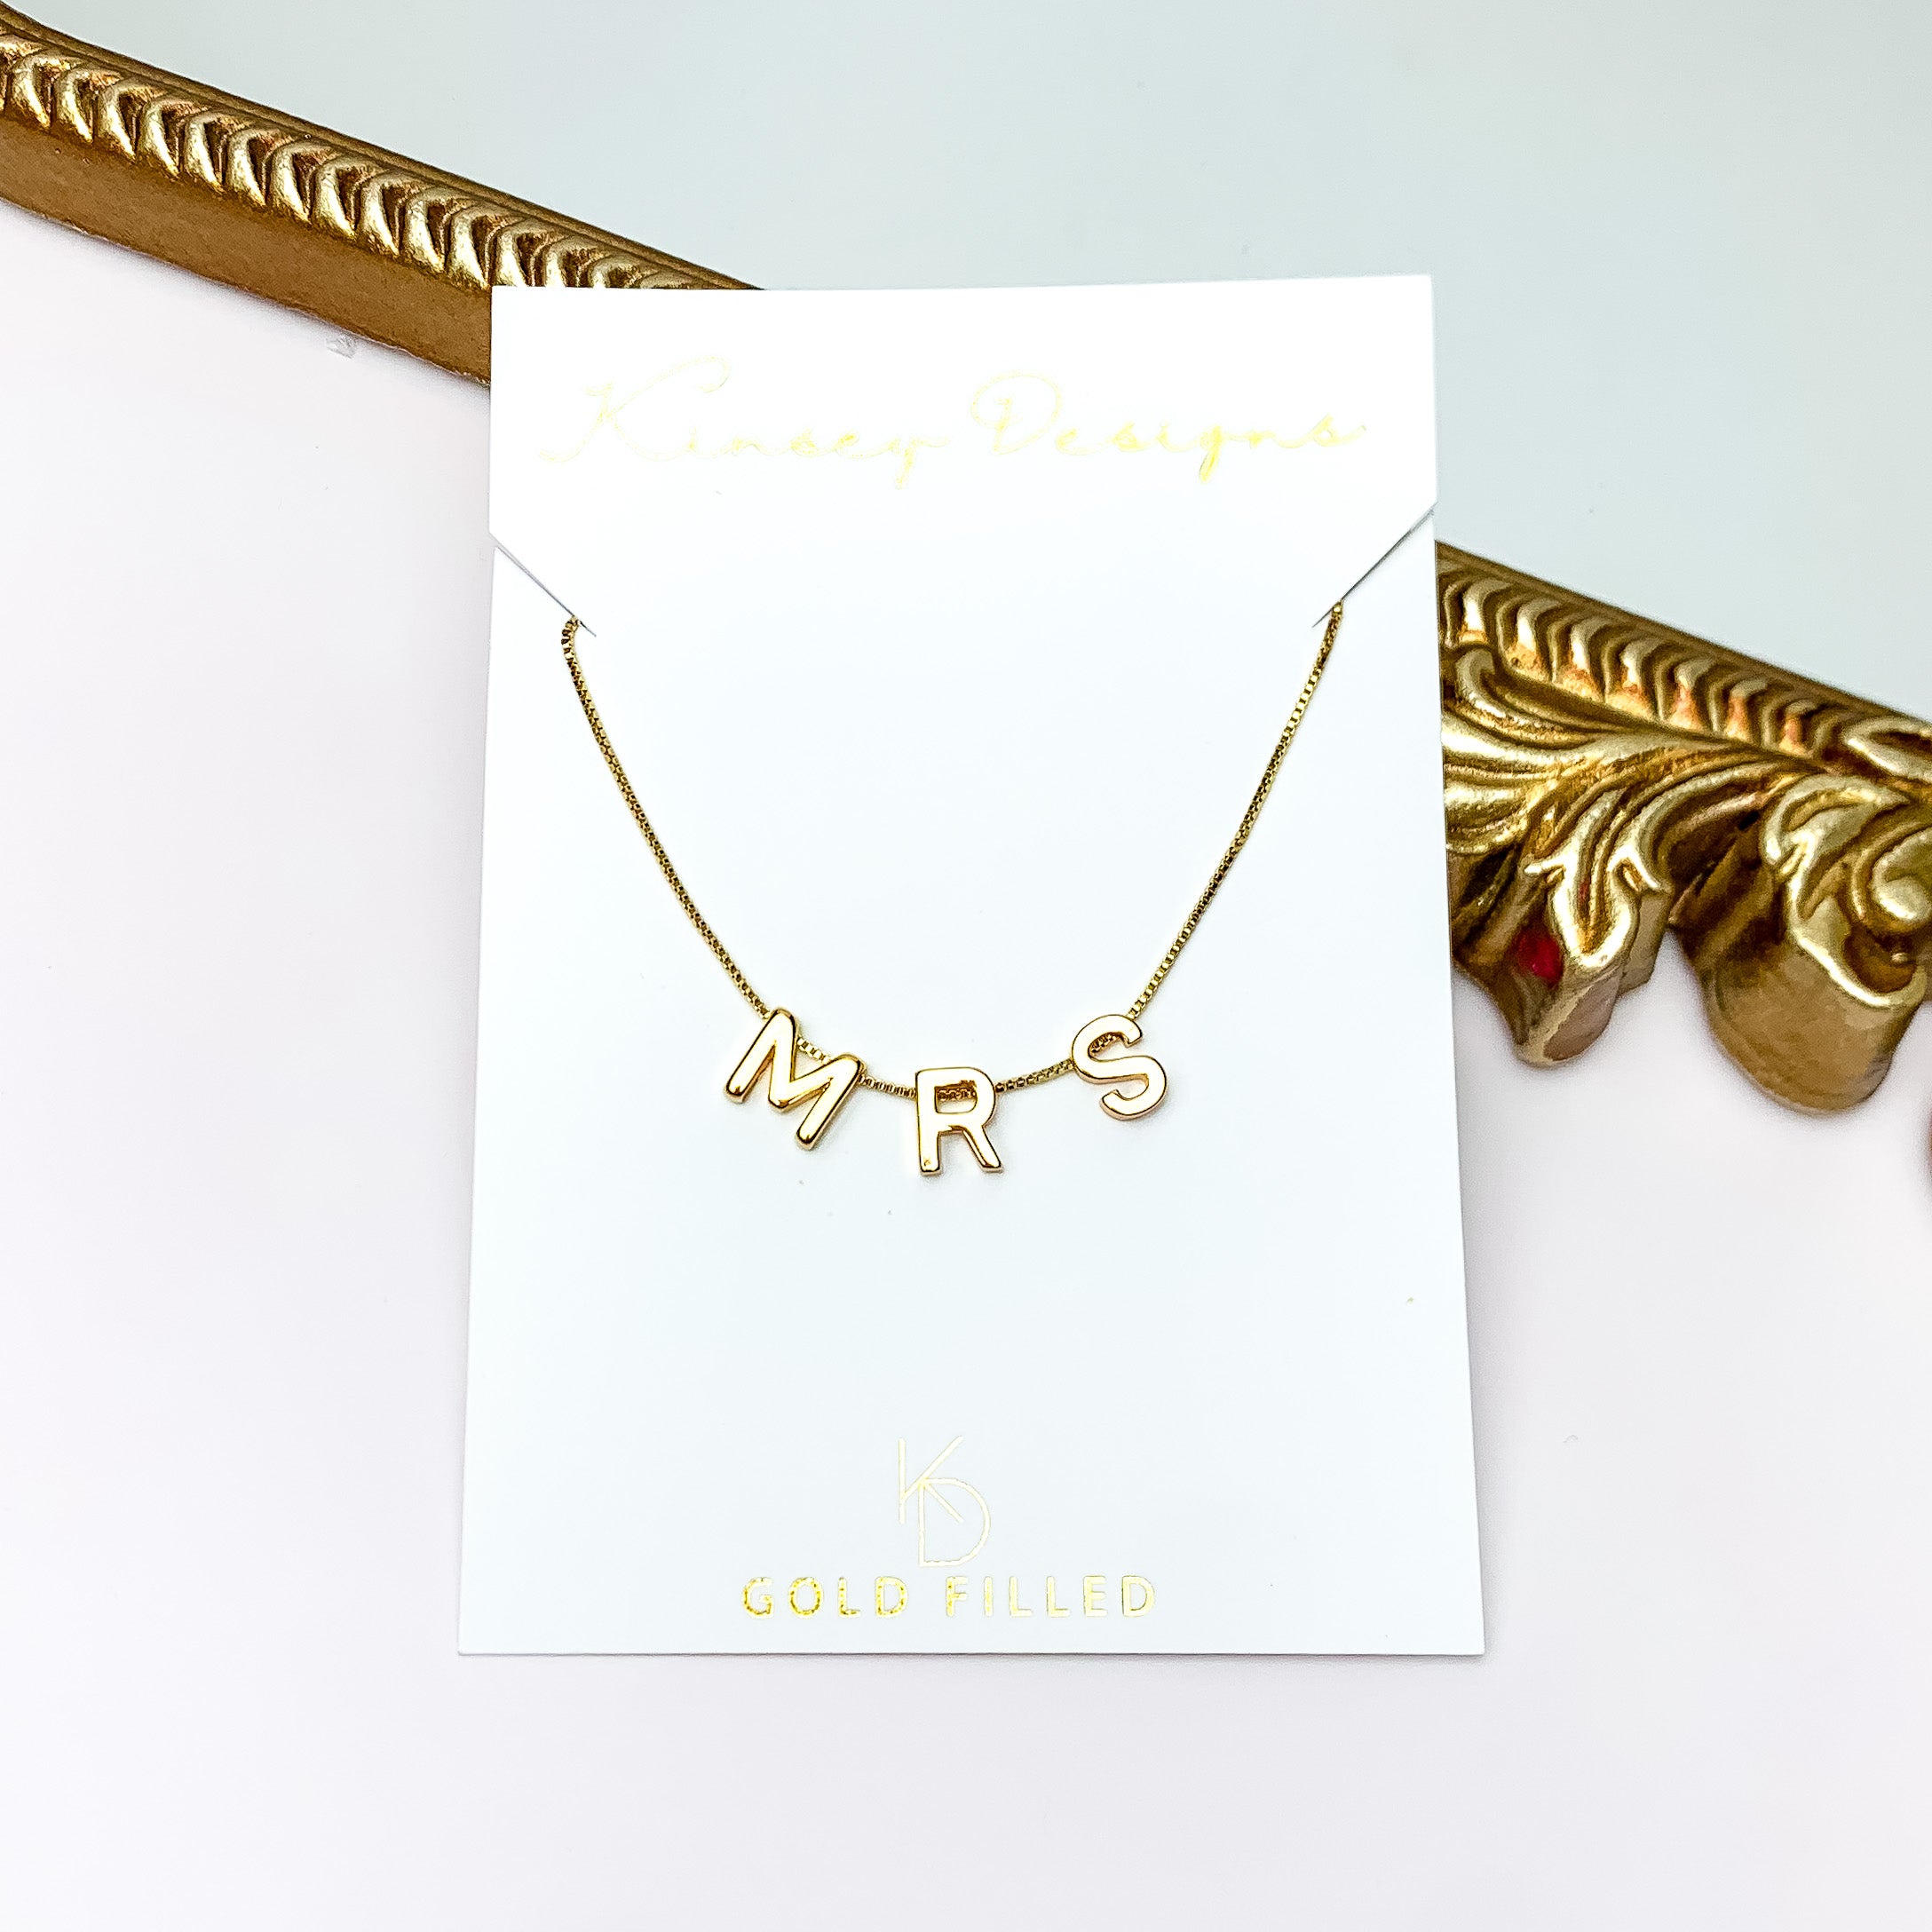 Pictured is a gold chain necklace with gold letter charms. This necklace includes letters that spell out "MRS". This necklace is pictured on a white necklace holder that is in front of a gold mirror on a white background.  